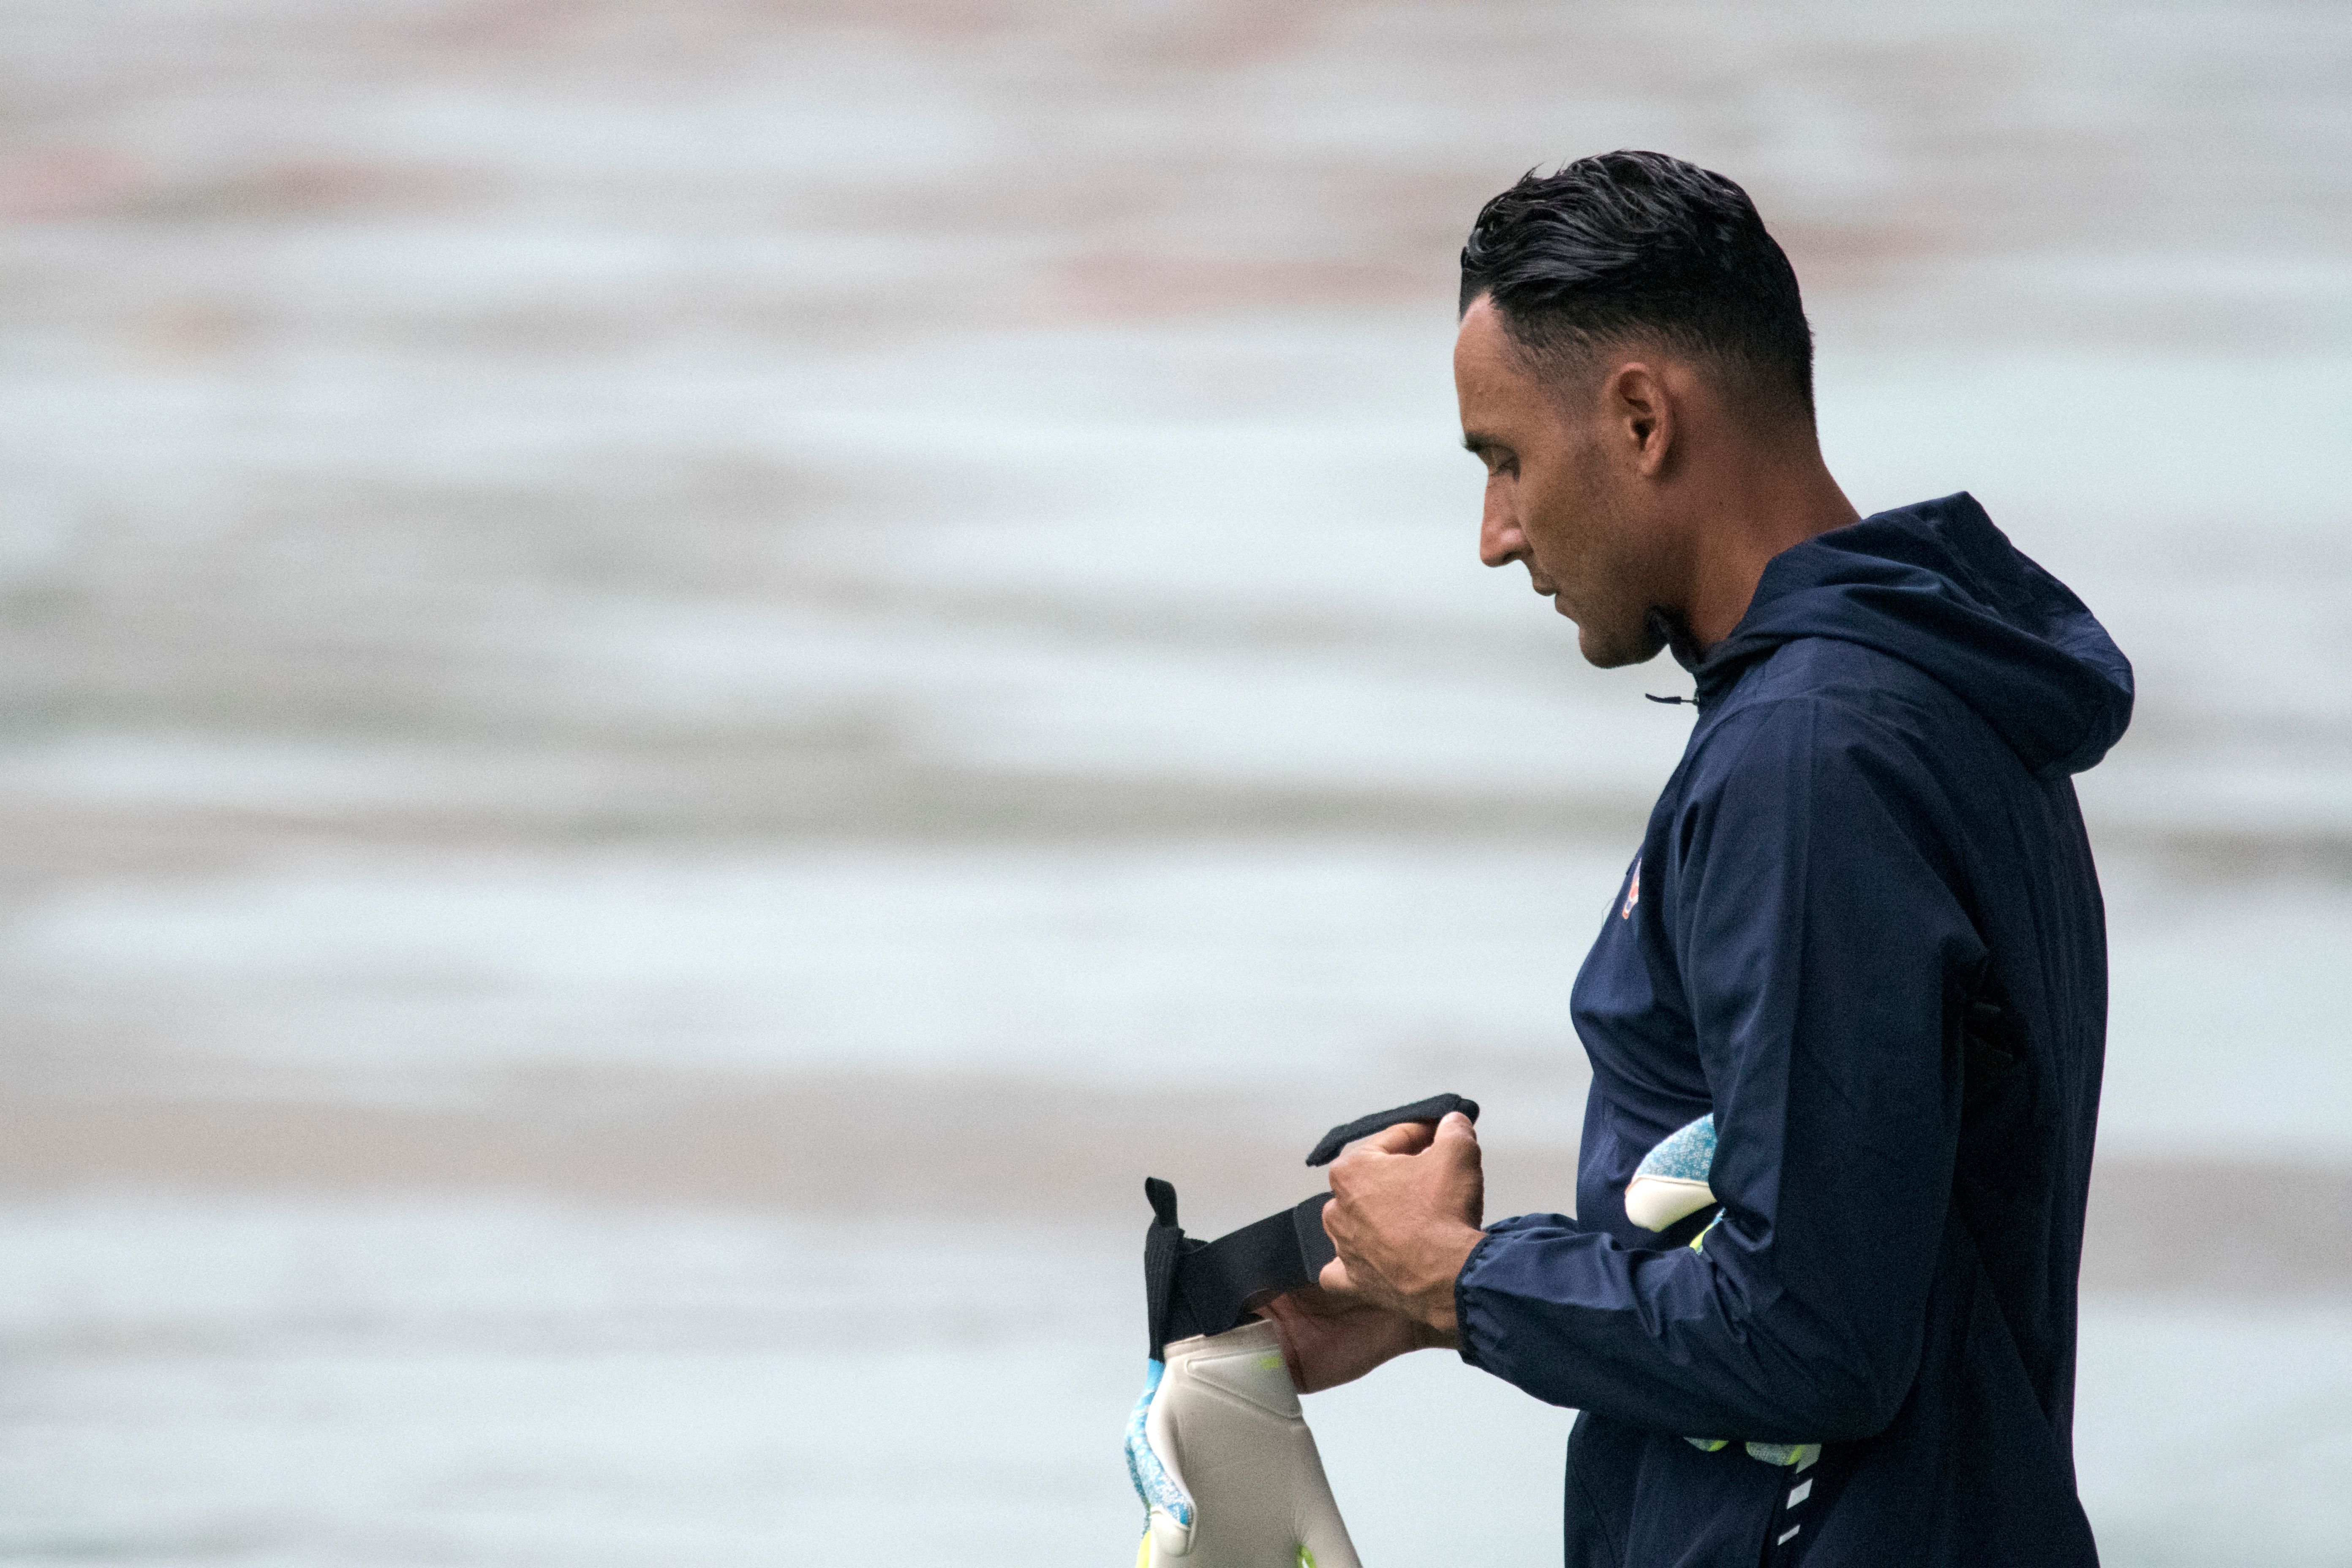 Keylor Navas is likely to return for PSG against Bayern Munich. (Photo by Ezequiel Becerra/AFP/Getty Images)